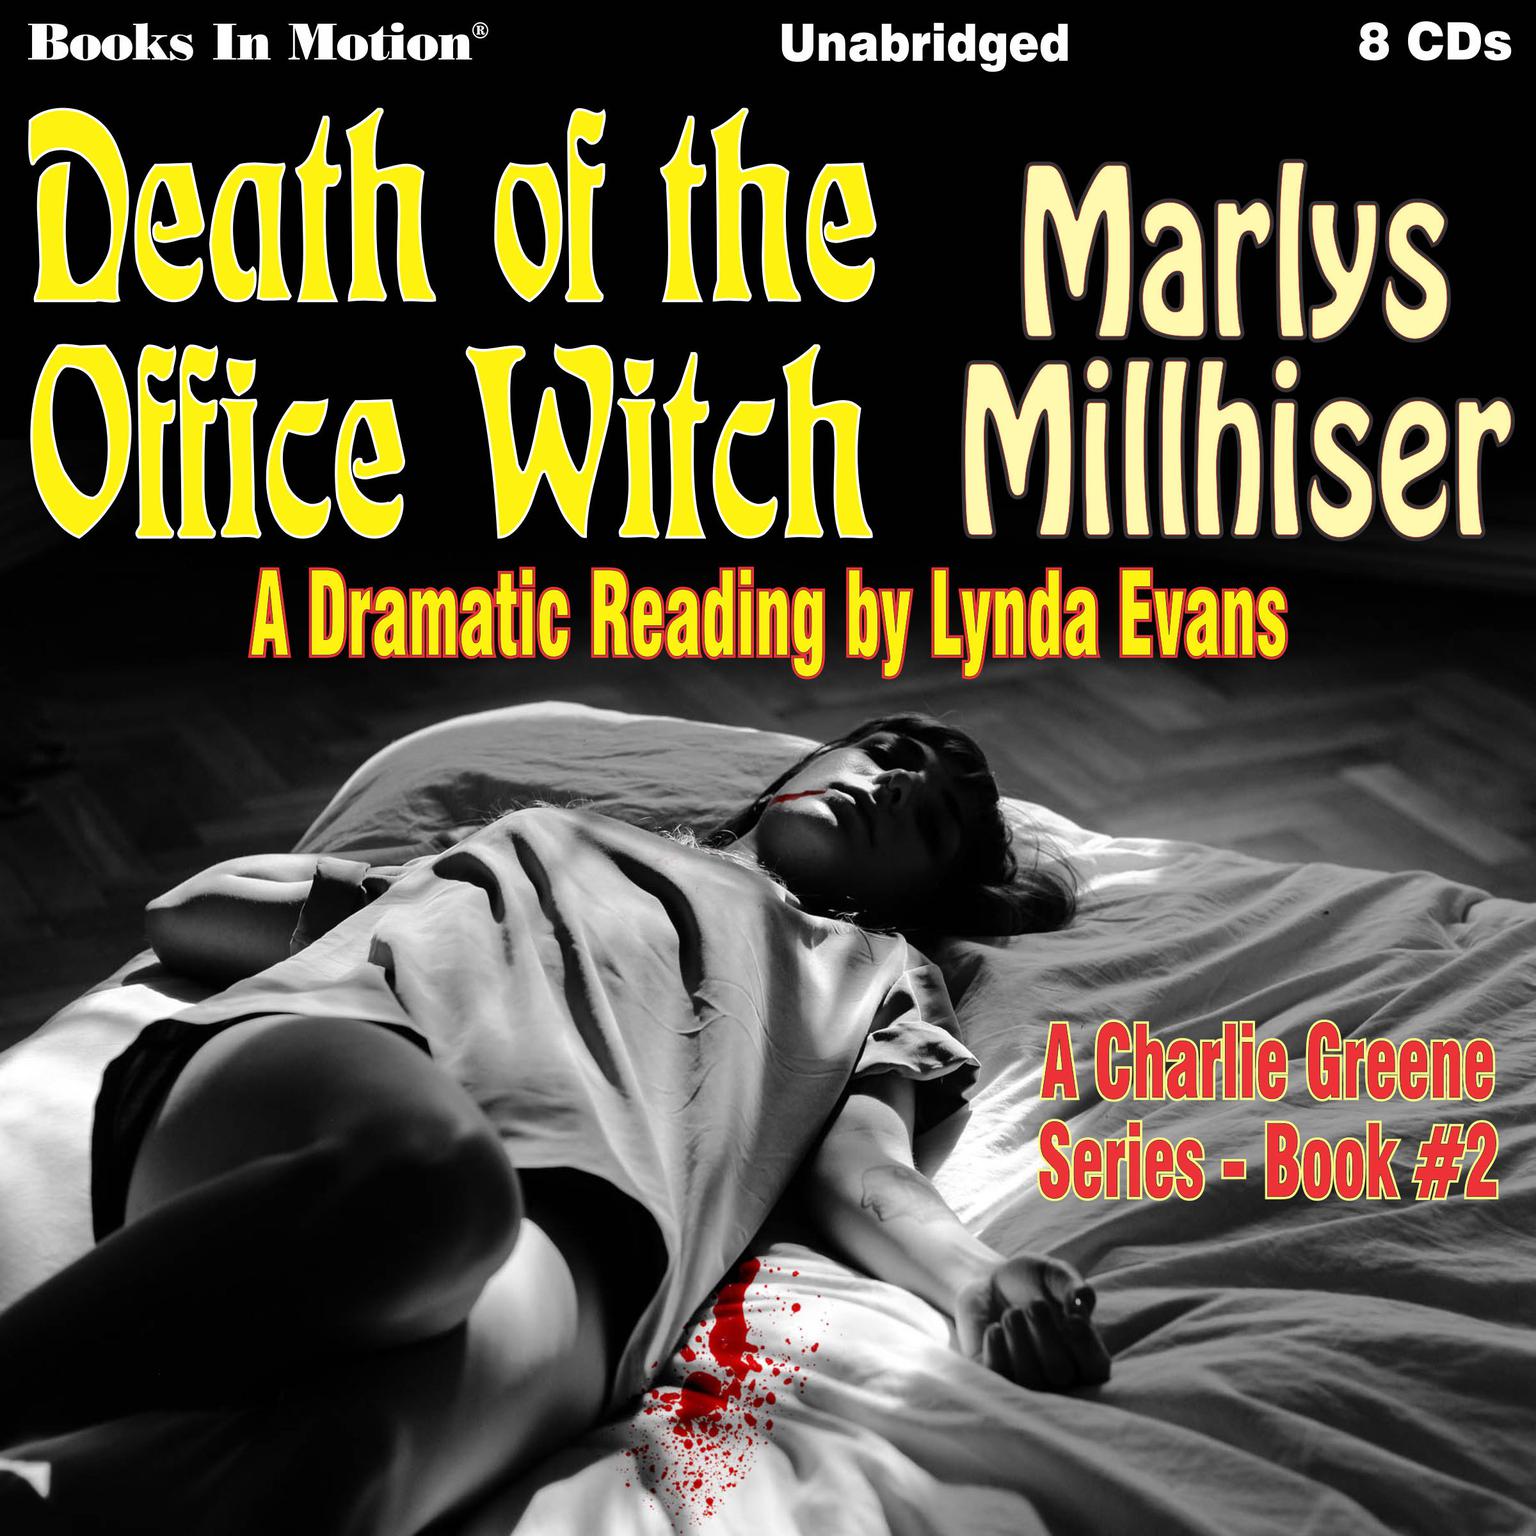 Death of the Office Witch Audiobook, by Marlys Millhiser